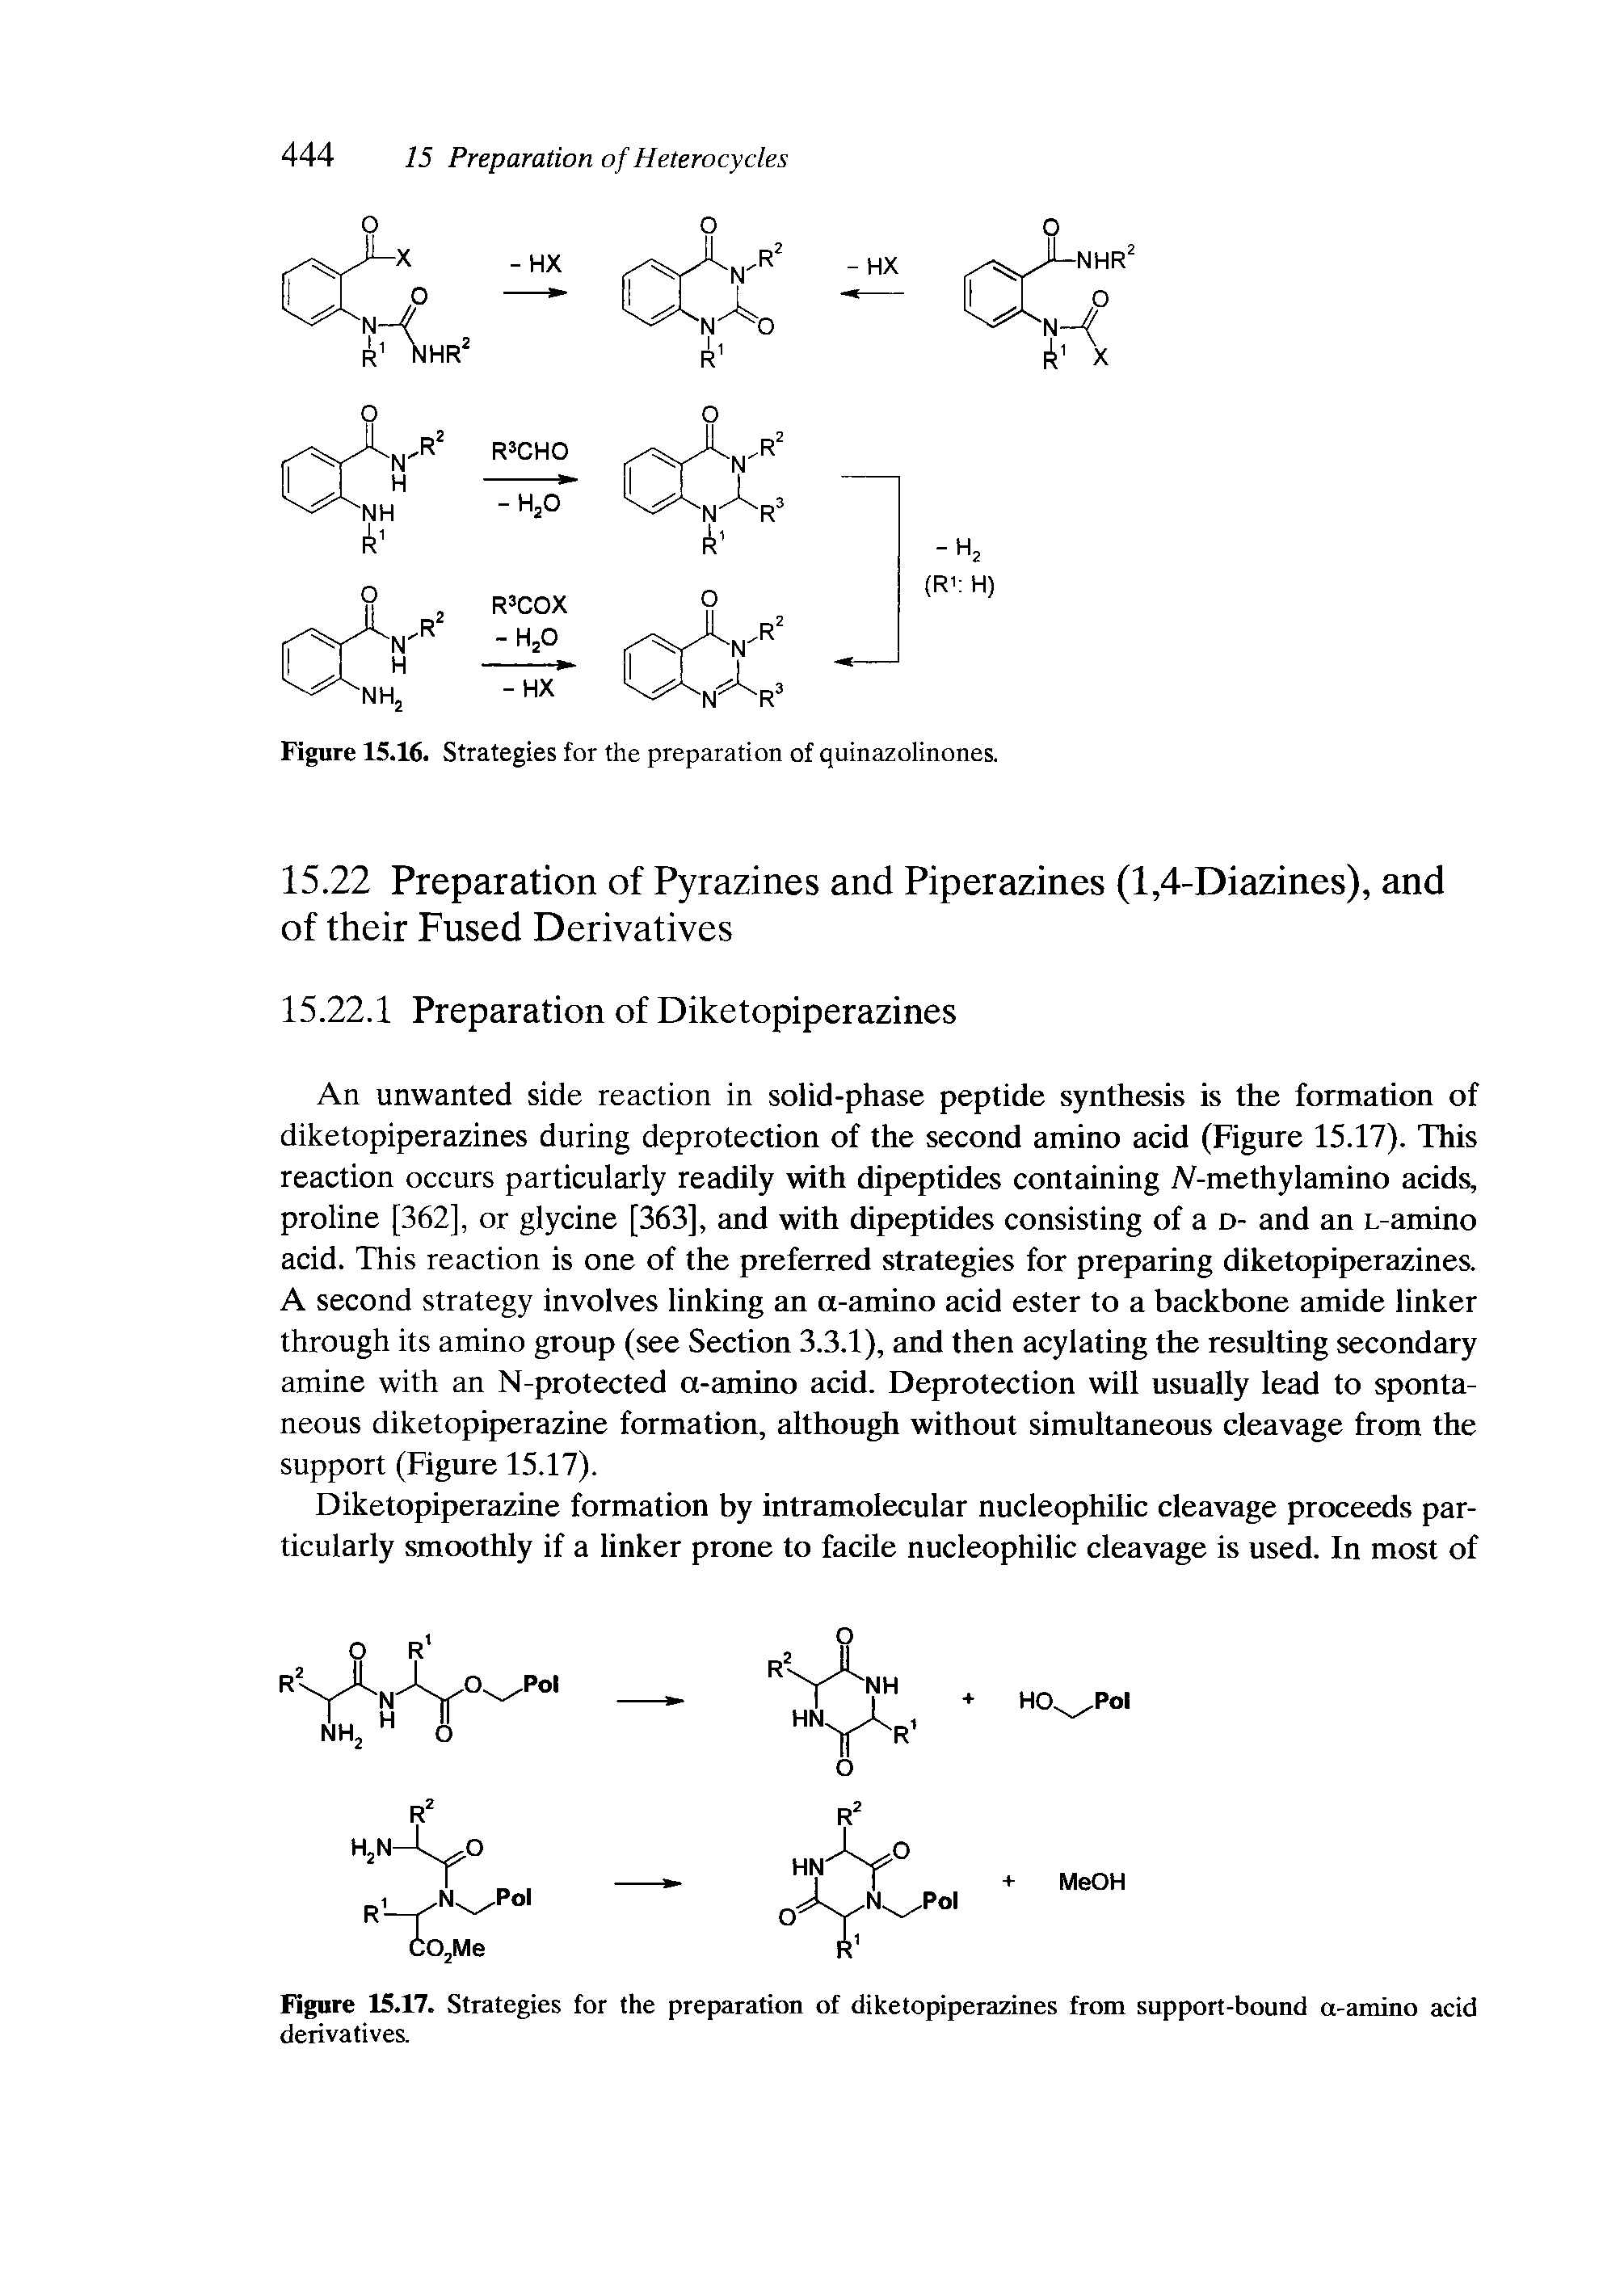 Figure 15.17. Strategies for the preparation of diketopiperazines from support-bound a-amino acid derivatives.